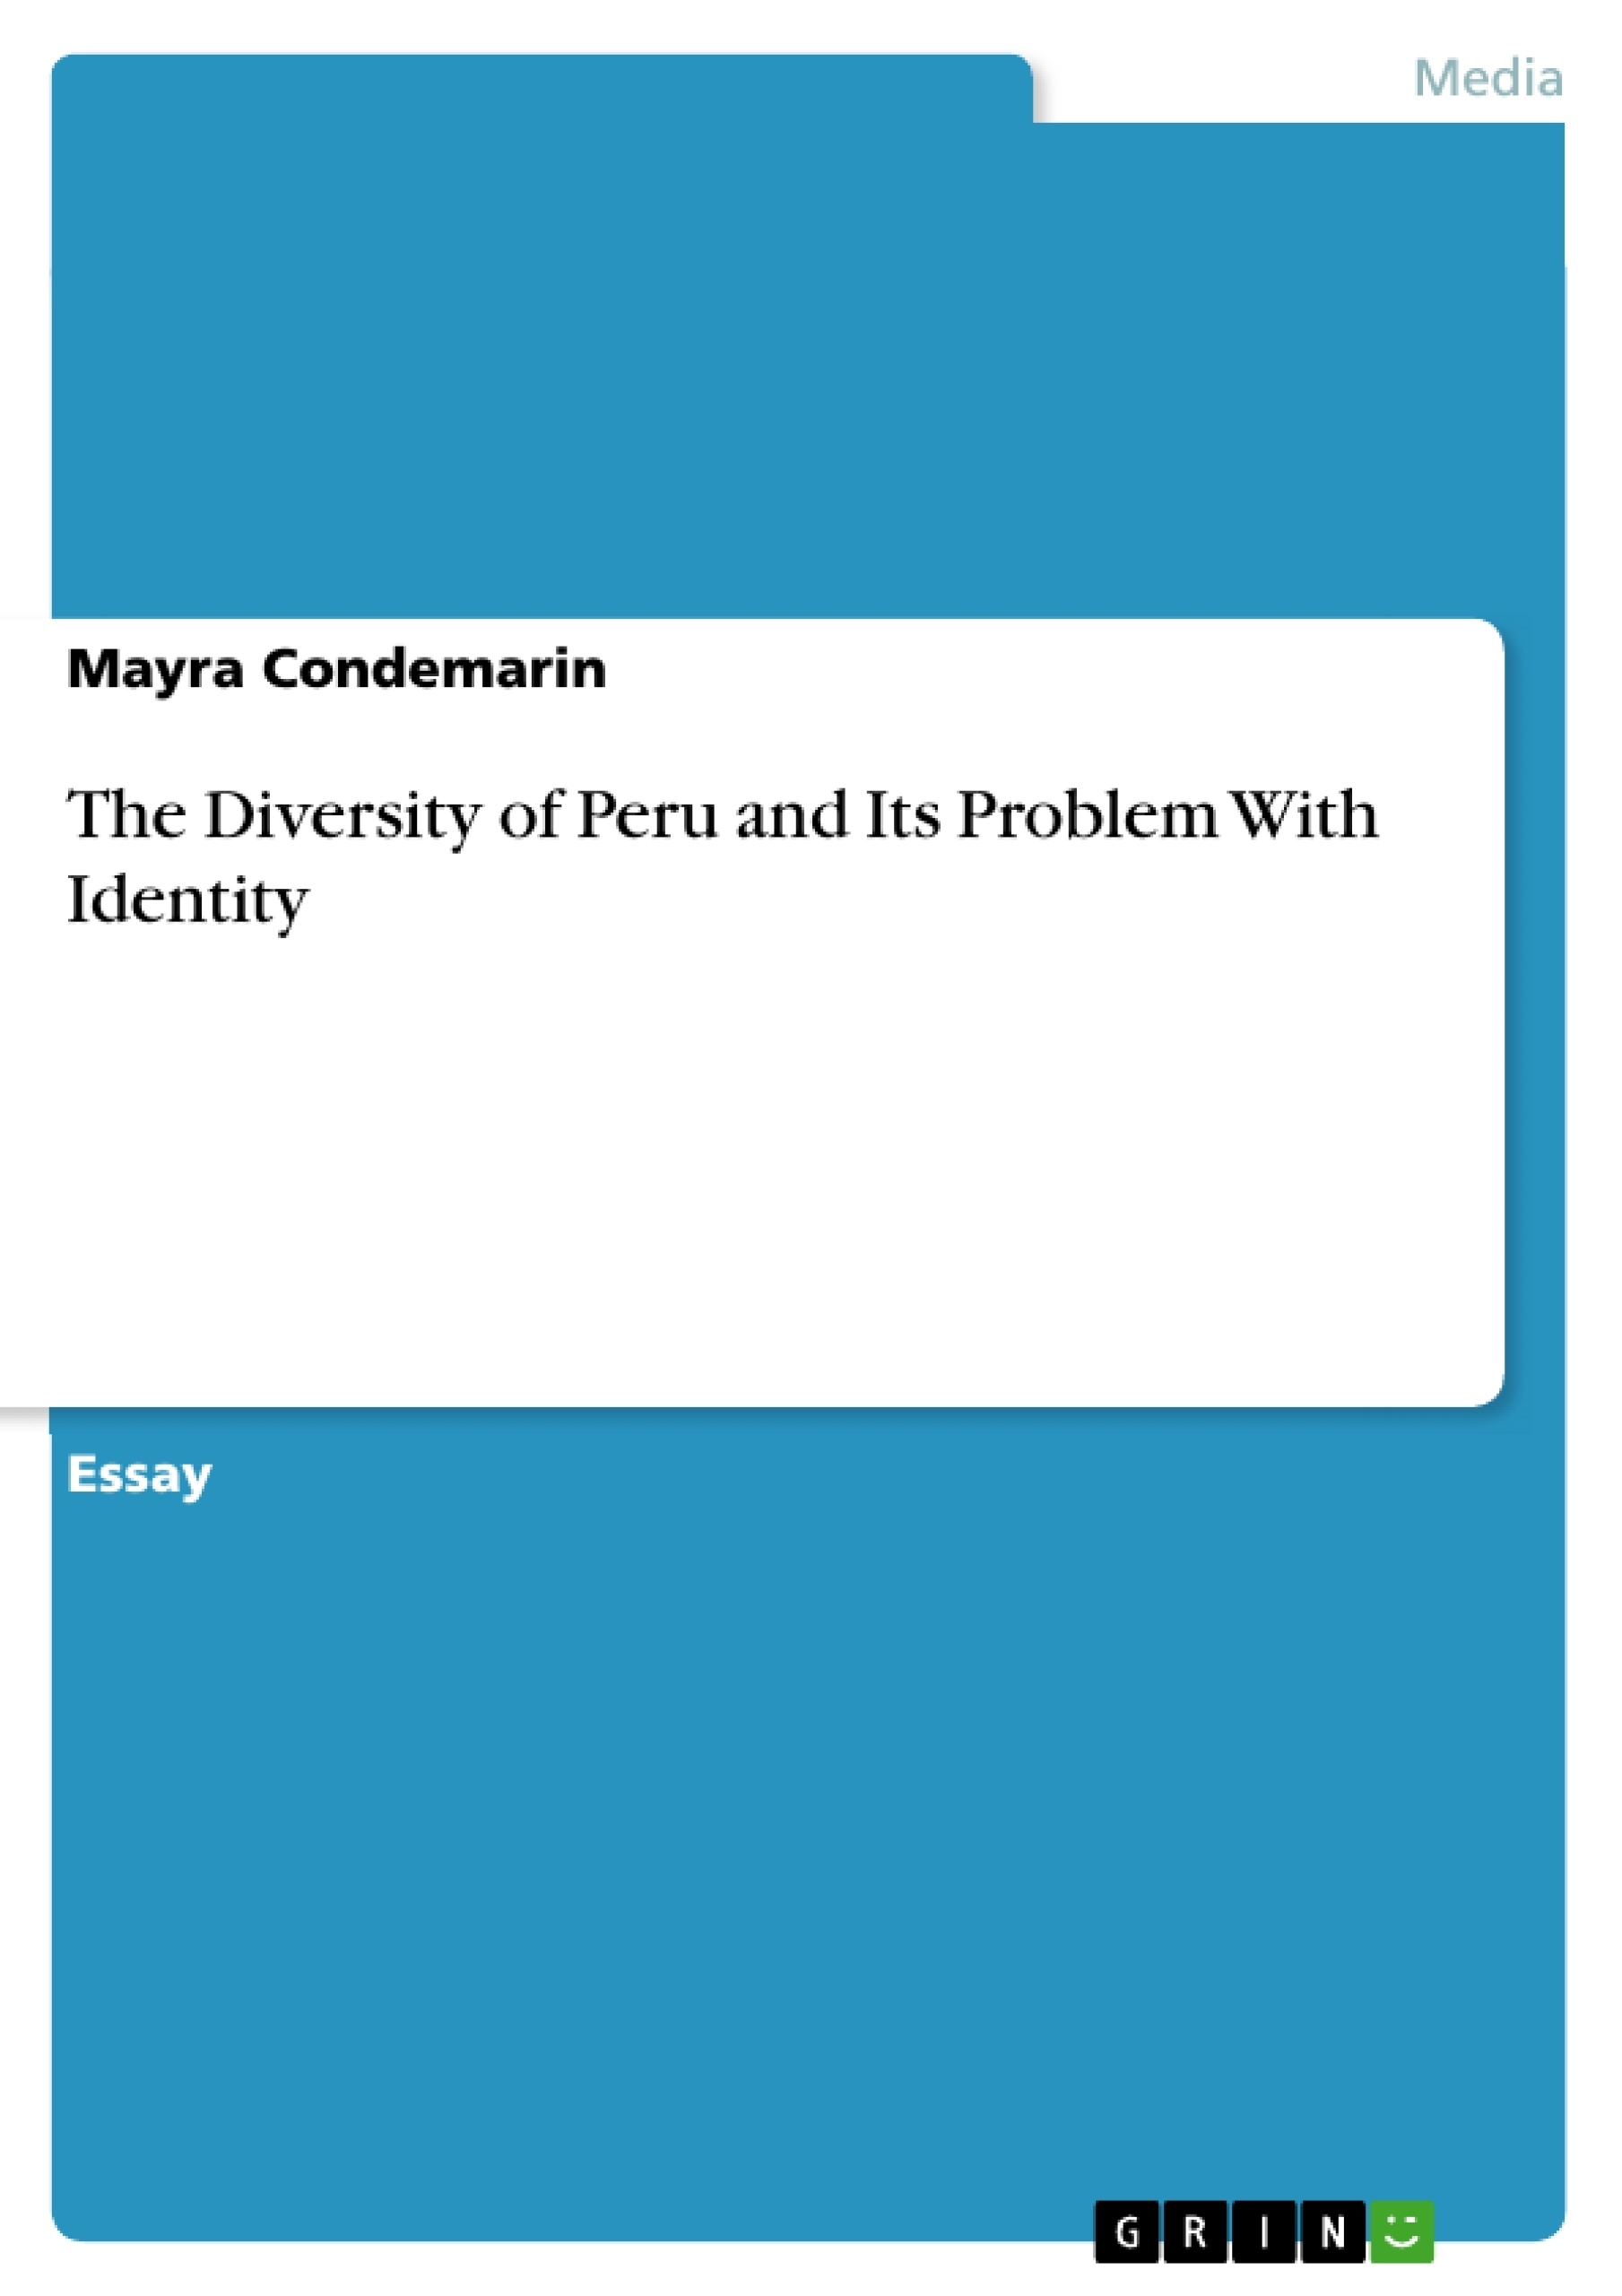 Title: The Diversity of Peru and Its Problem With Identity